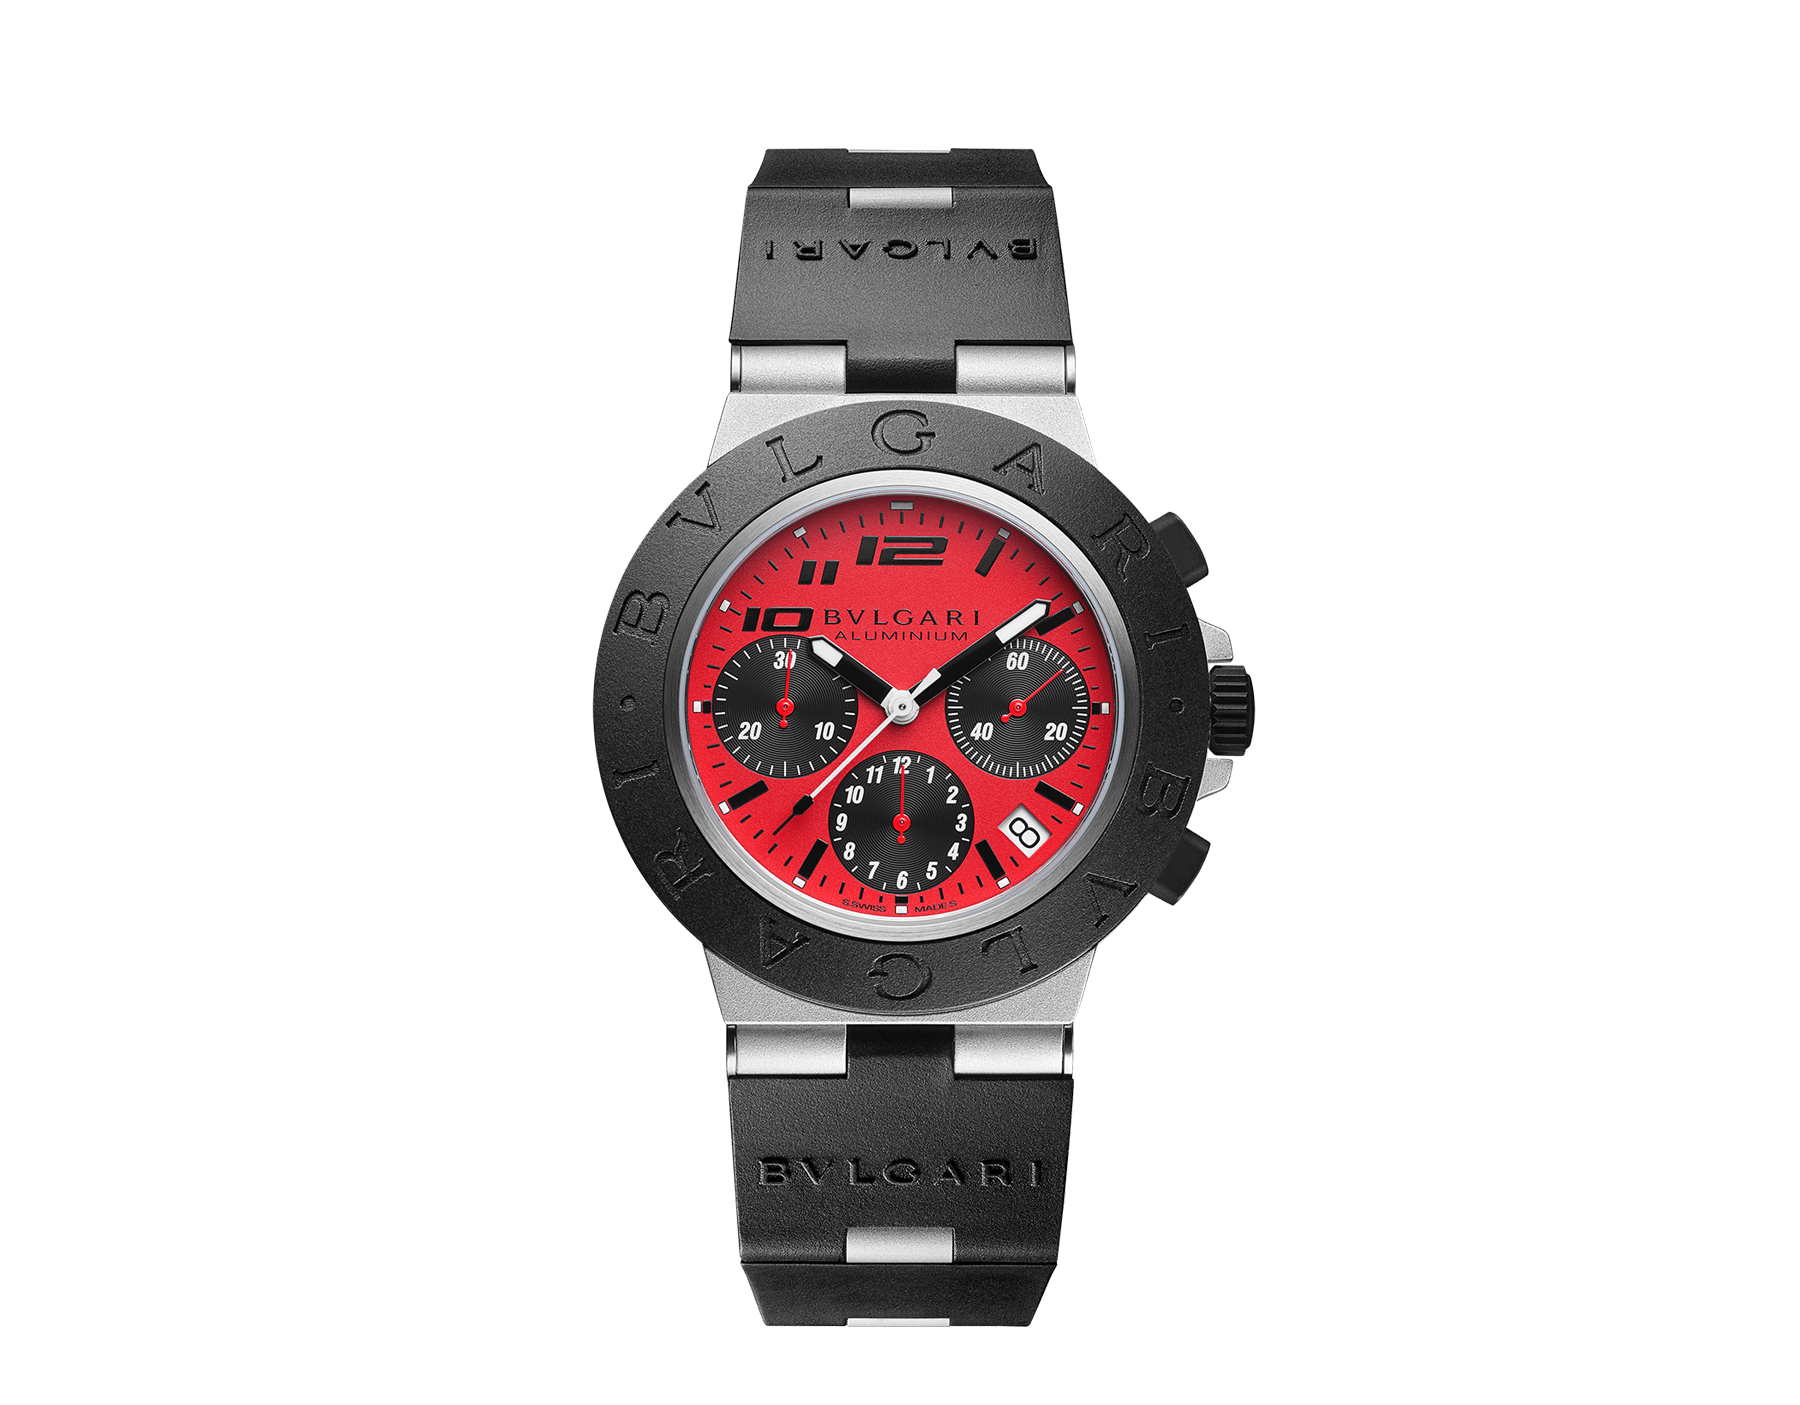 Bulgari Aluminium Ducati Special Edition watch with mechanical manufacture movement, automatic winding, chronograph, 40 mm aluminum case, black rubber bezel with BVLGARI BVLGARI engraving, red dial and black rubber bracelet. Water-resistant up to 100 meters. Special Edition of 1,000 pieces. 103701 image 1